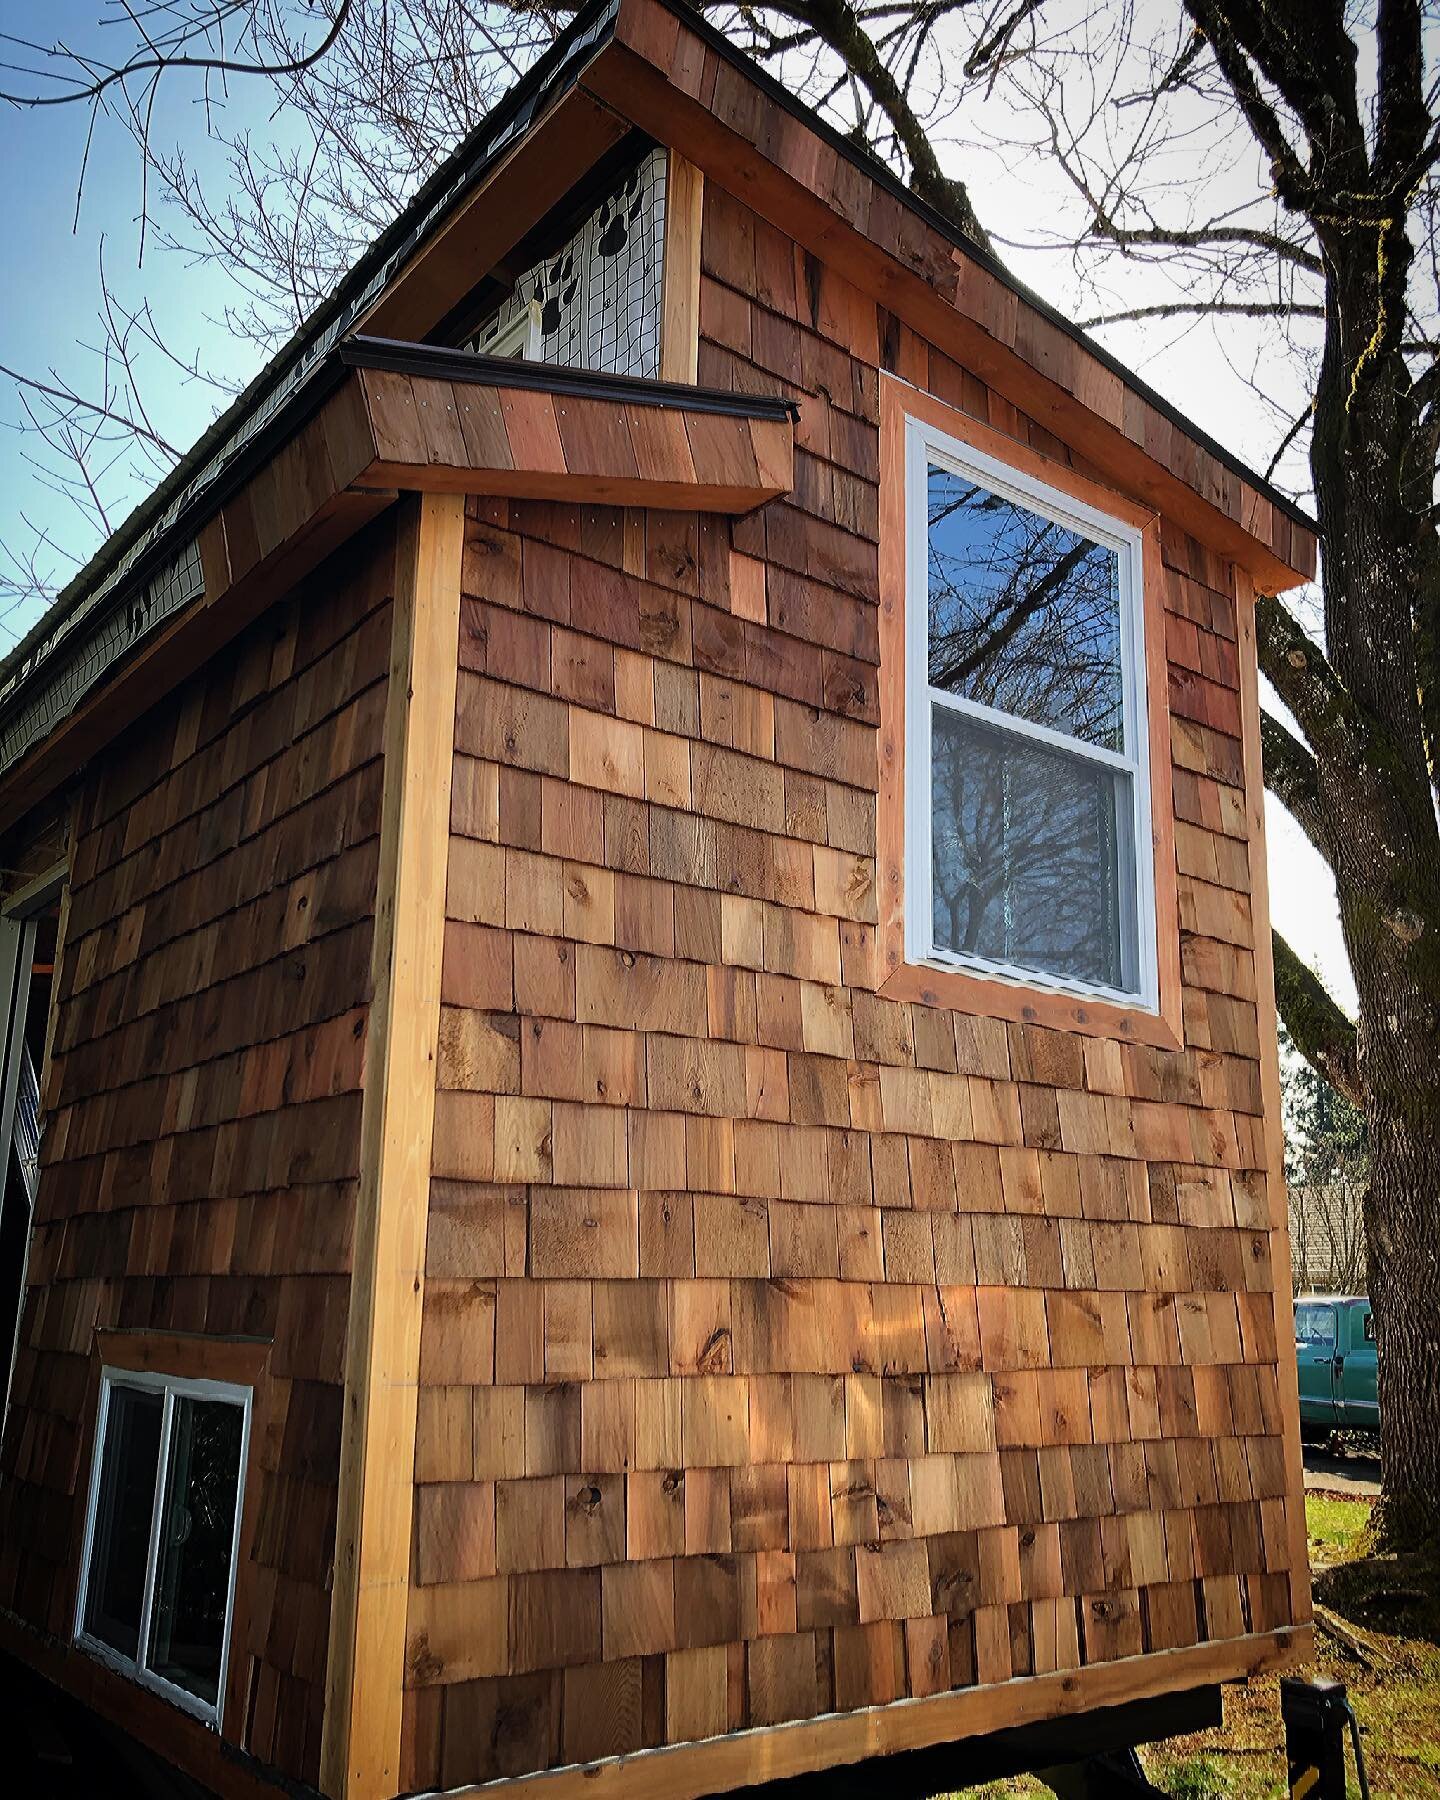 We made big progress on this beautiful day. One side is complete. Two windows are complete! 

#tinyhouse #tinyhome #cedarshakes #diy #buildyourownhome